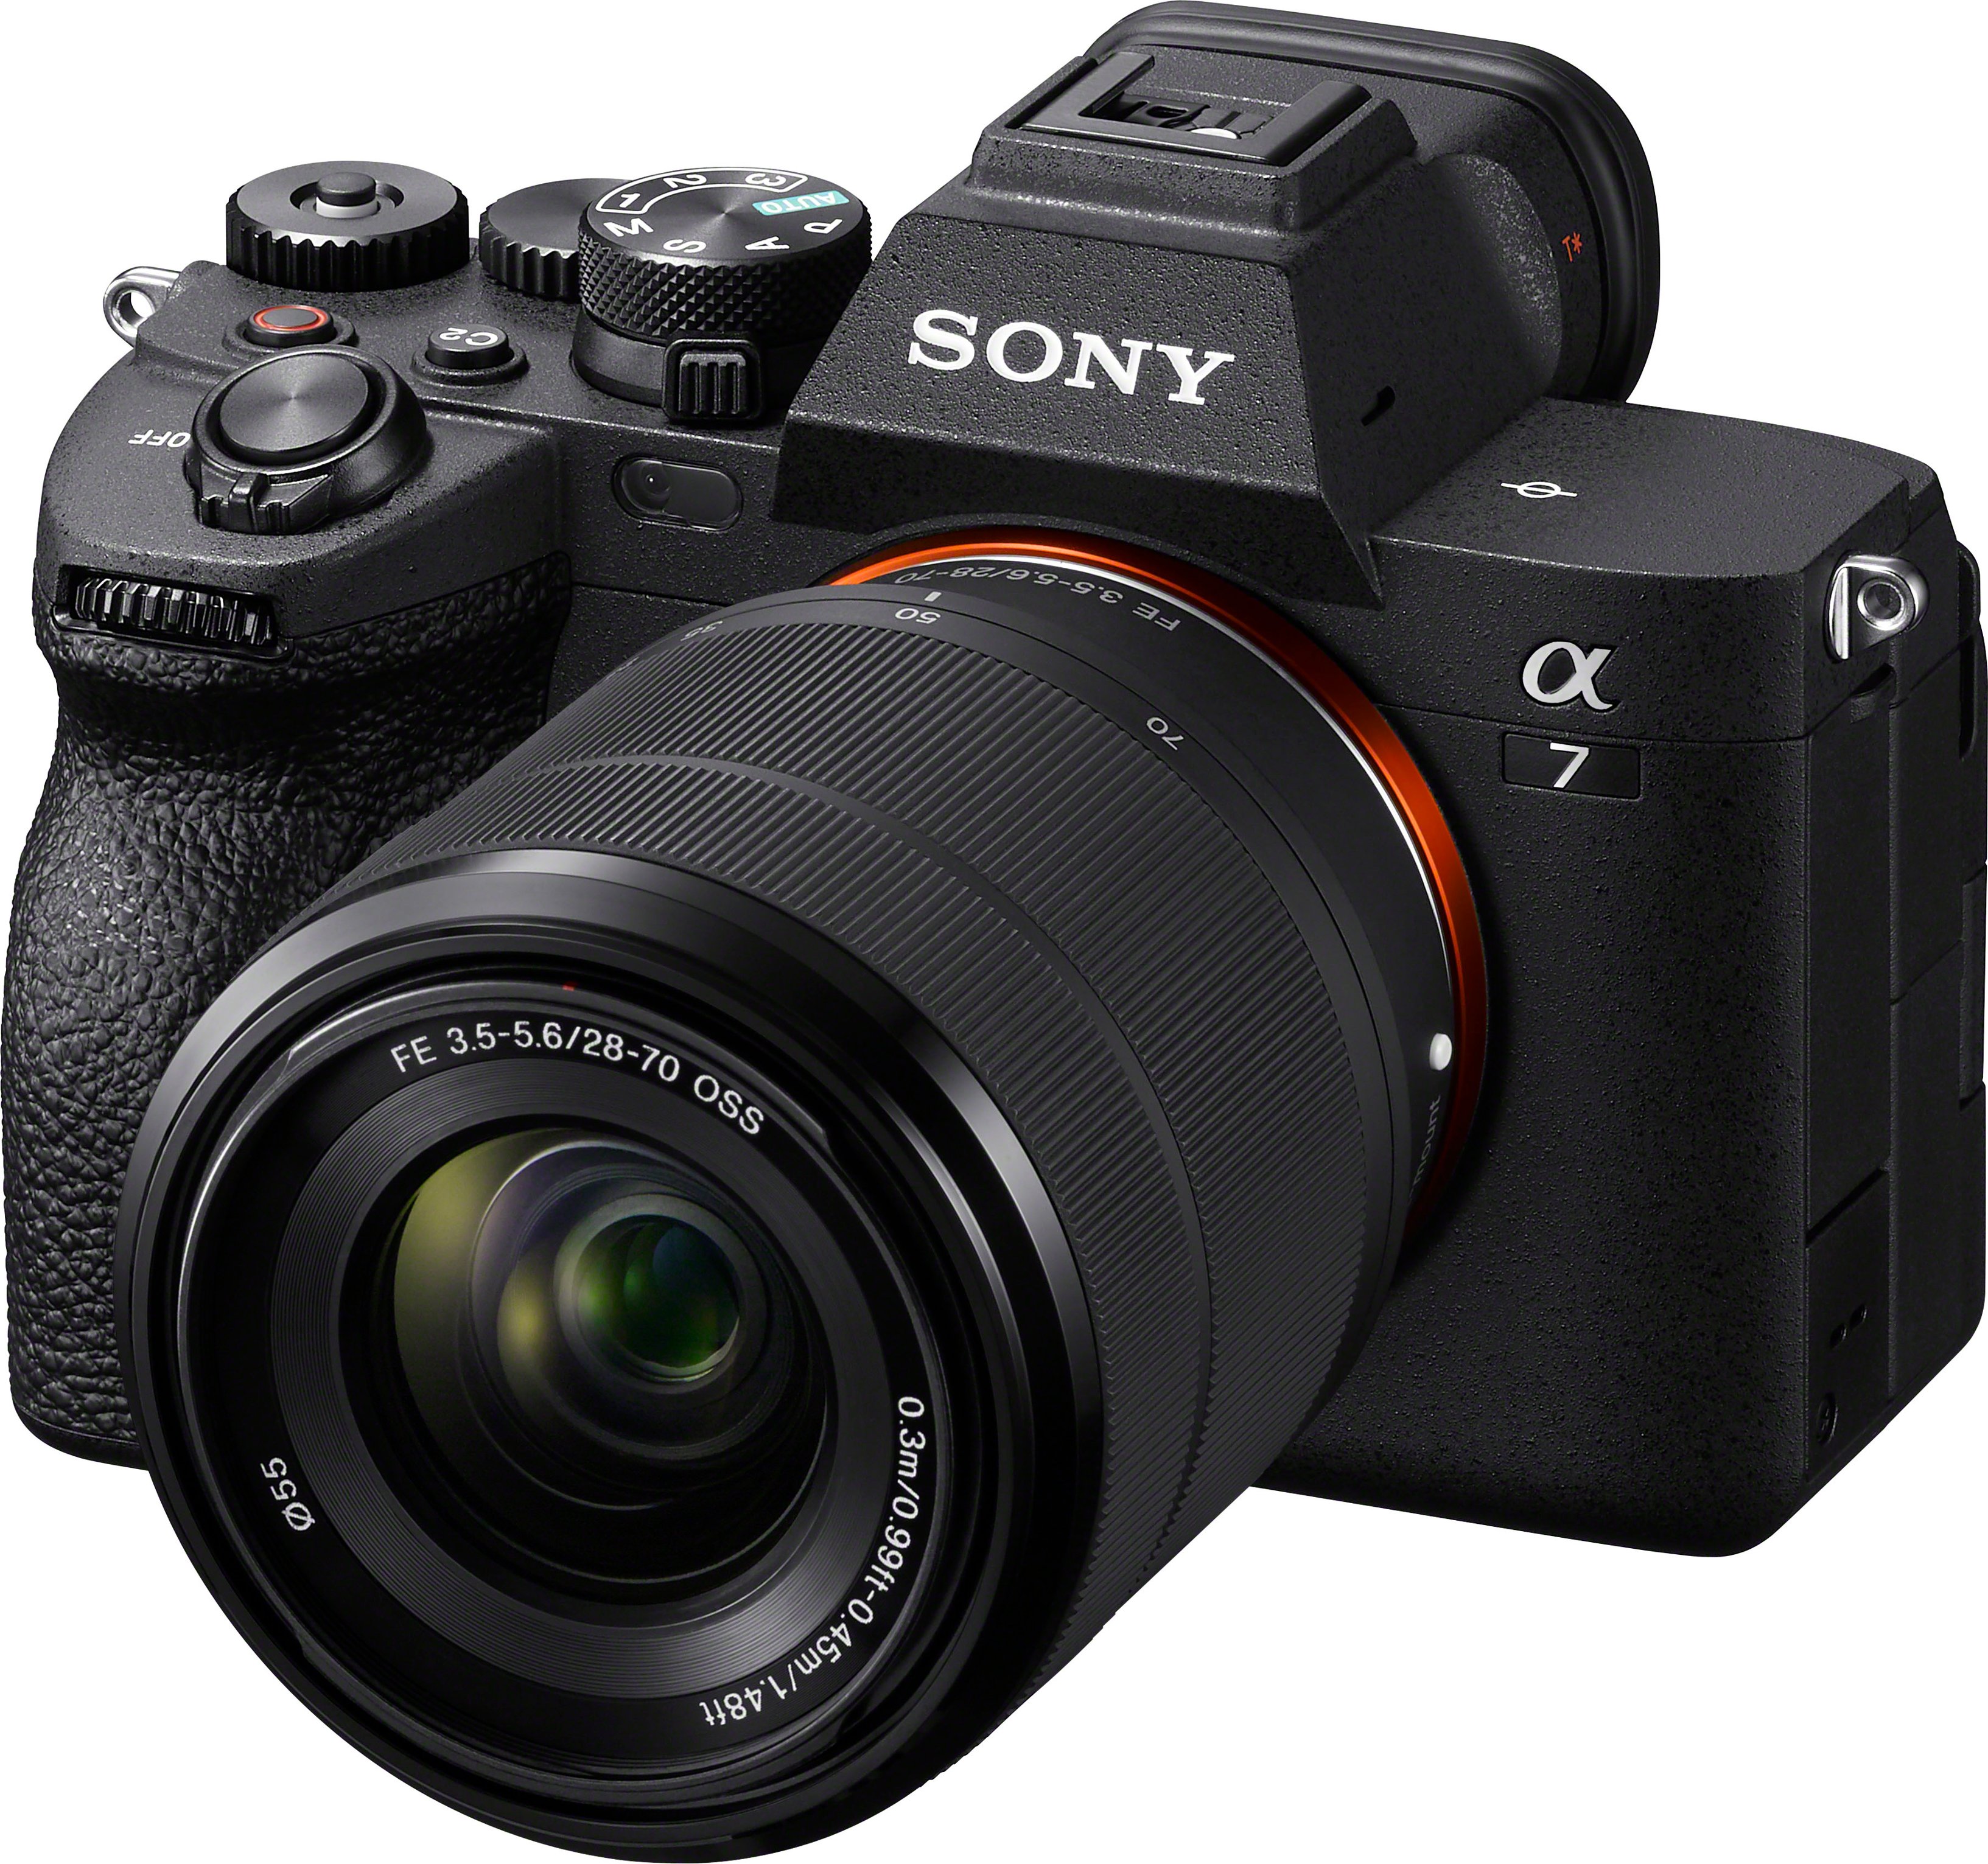 Angle View: Sony - Alpha 7 IV Full-frame Mirrorless Interchangeable Lens Camera with SEL2870 Lens - Black